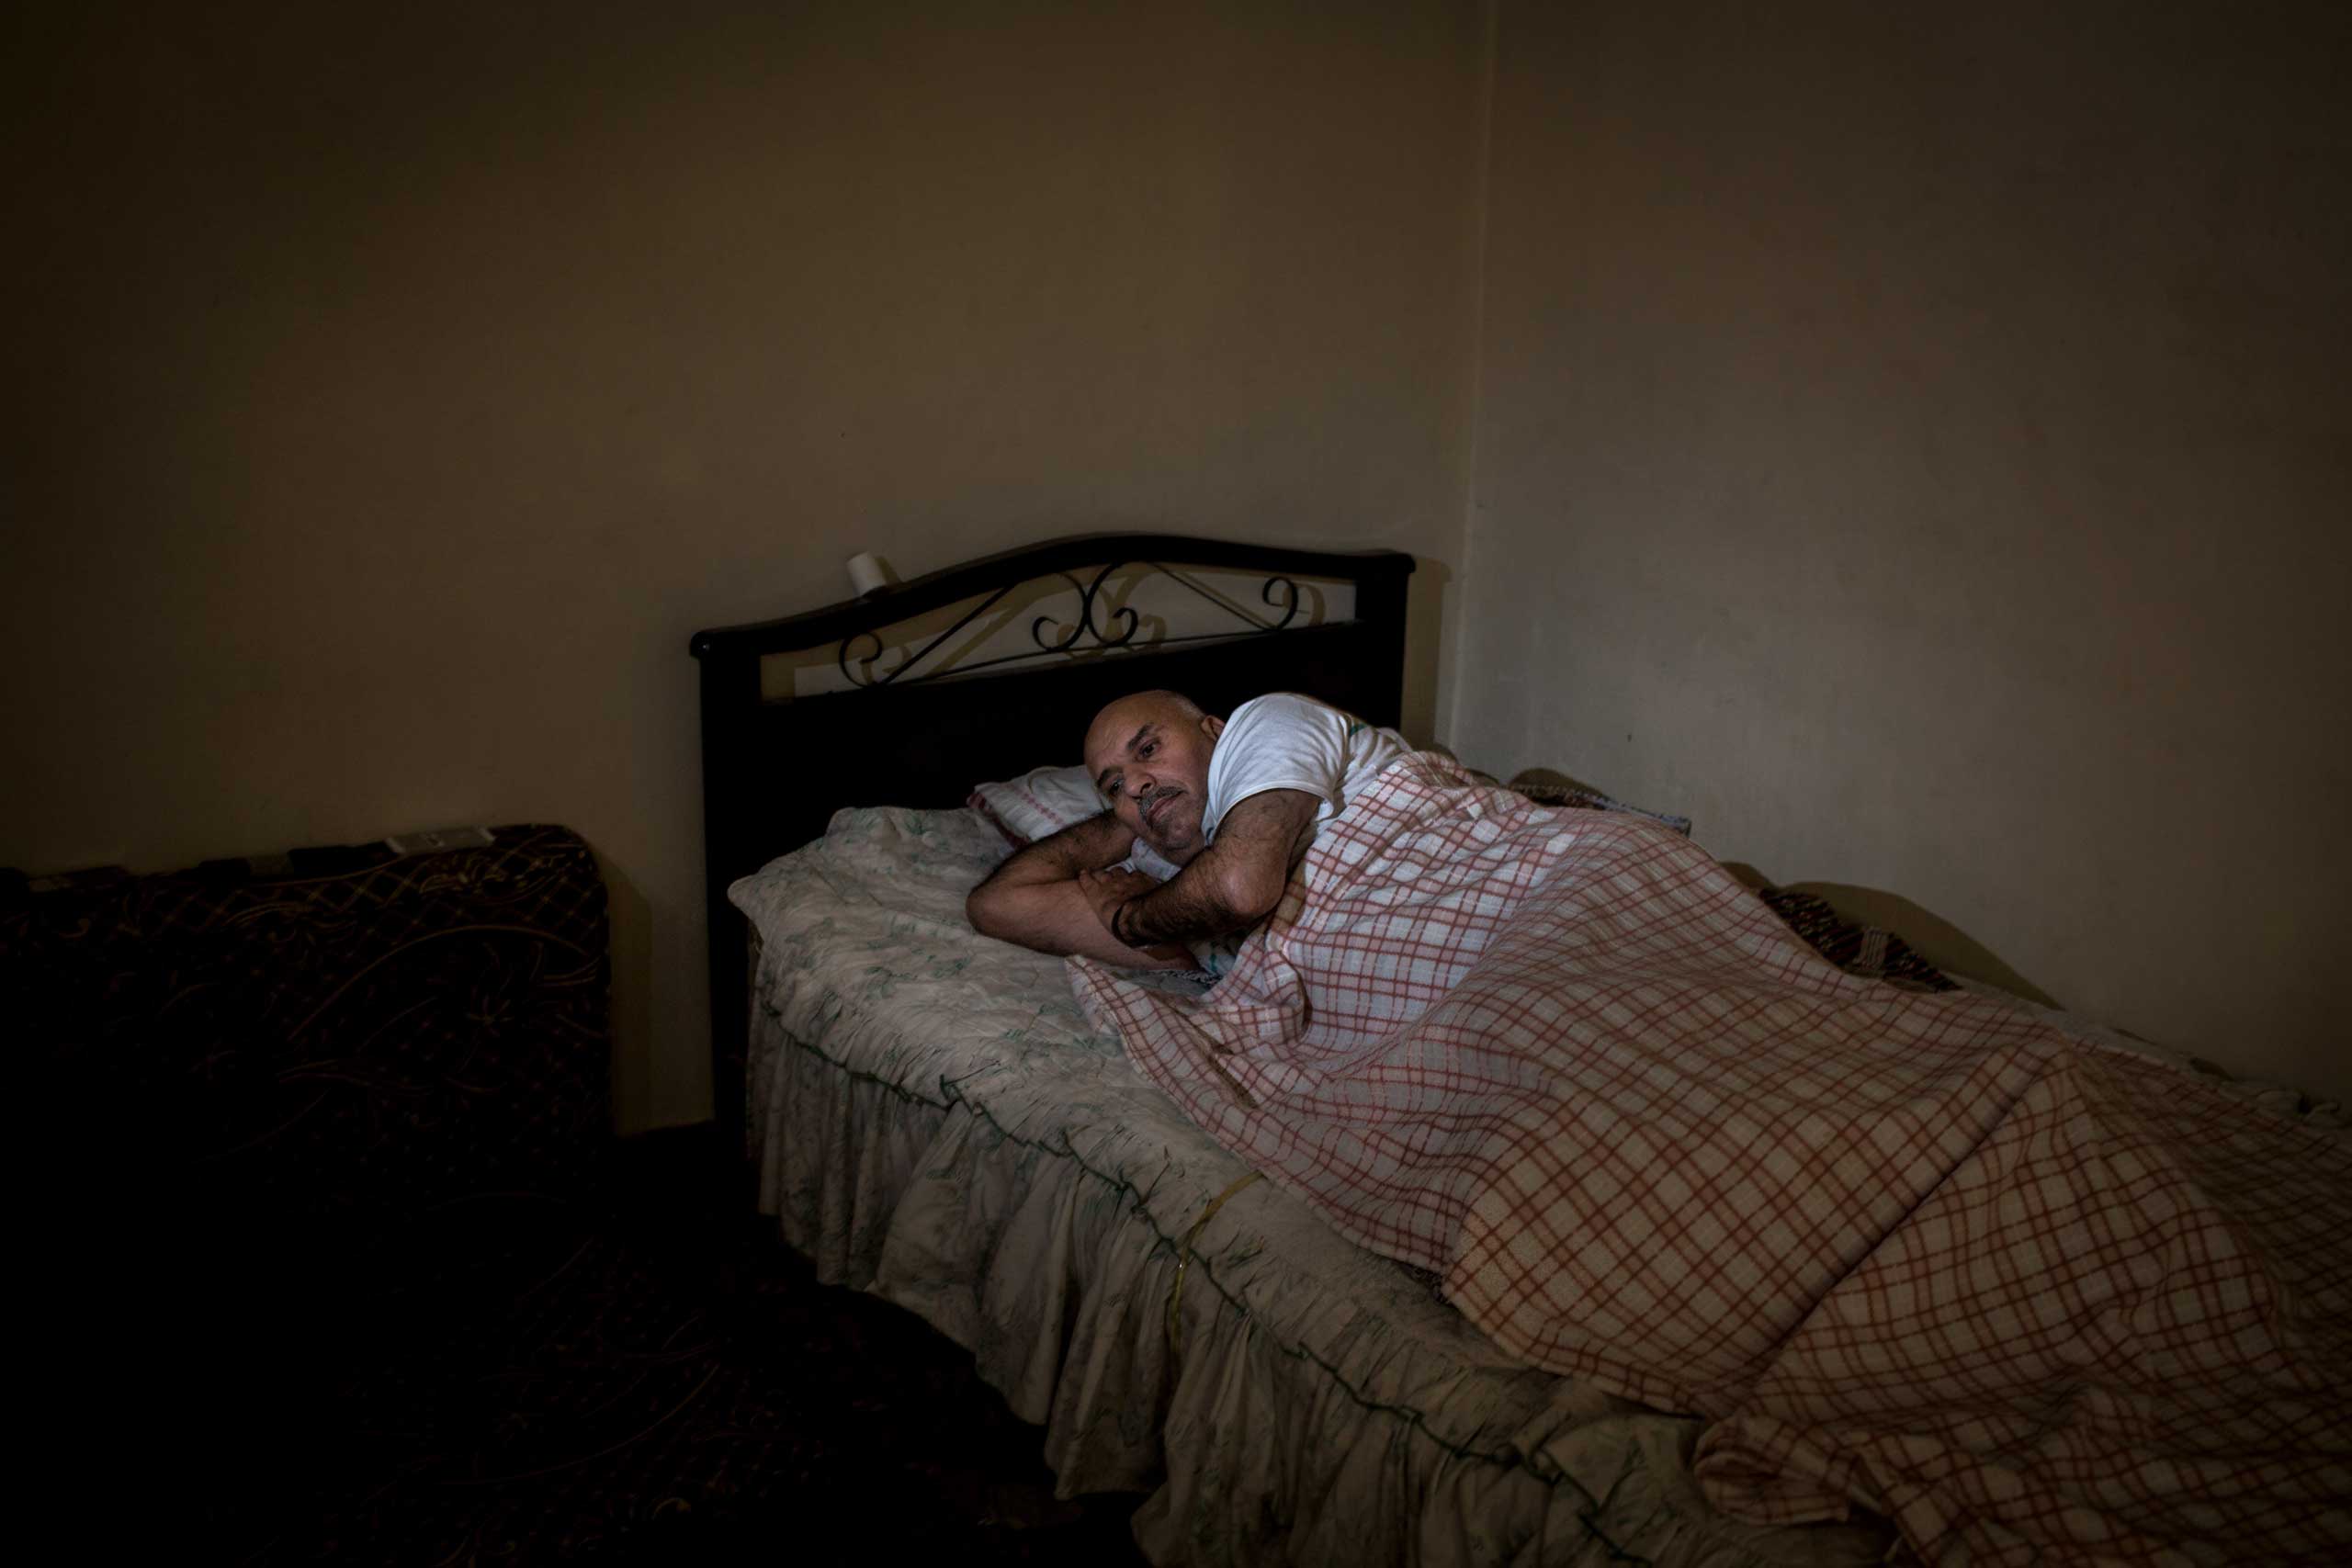 Ali, 54, lies in a bed in Zahle, Lebanon, June 26, 2014. Shelling and shooting in Awar, Syria, in April 2013 left him paralyzed from the waist down. His lack of movement has resulted in bedsores and he needs additional care.